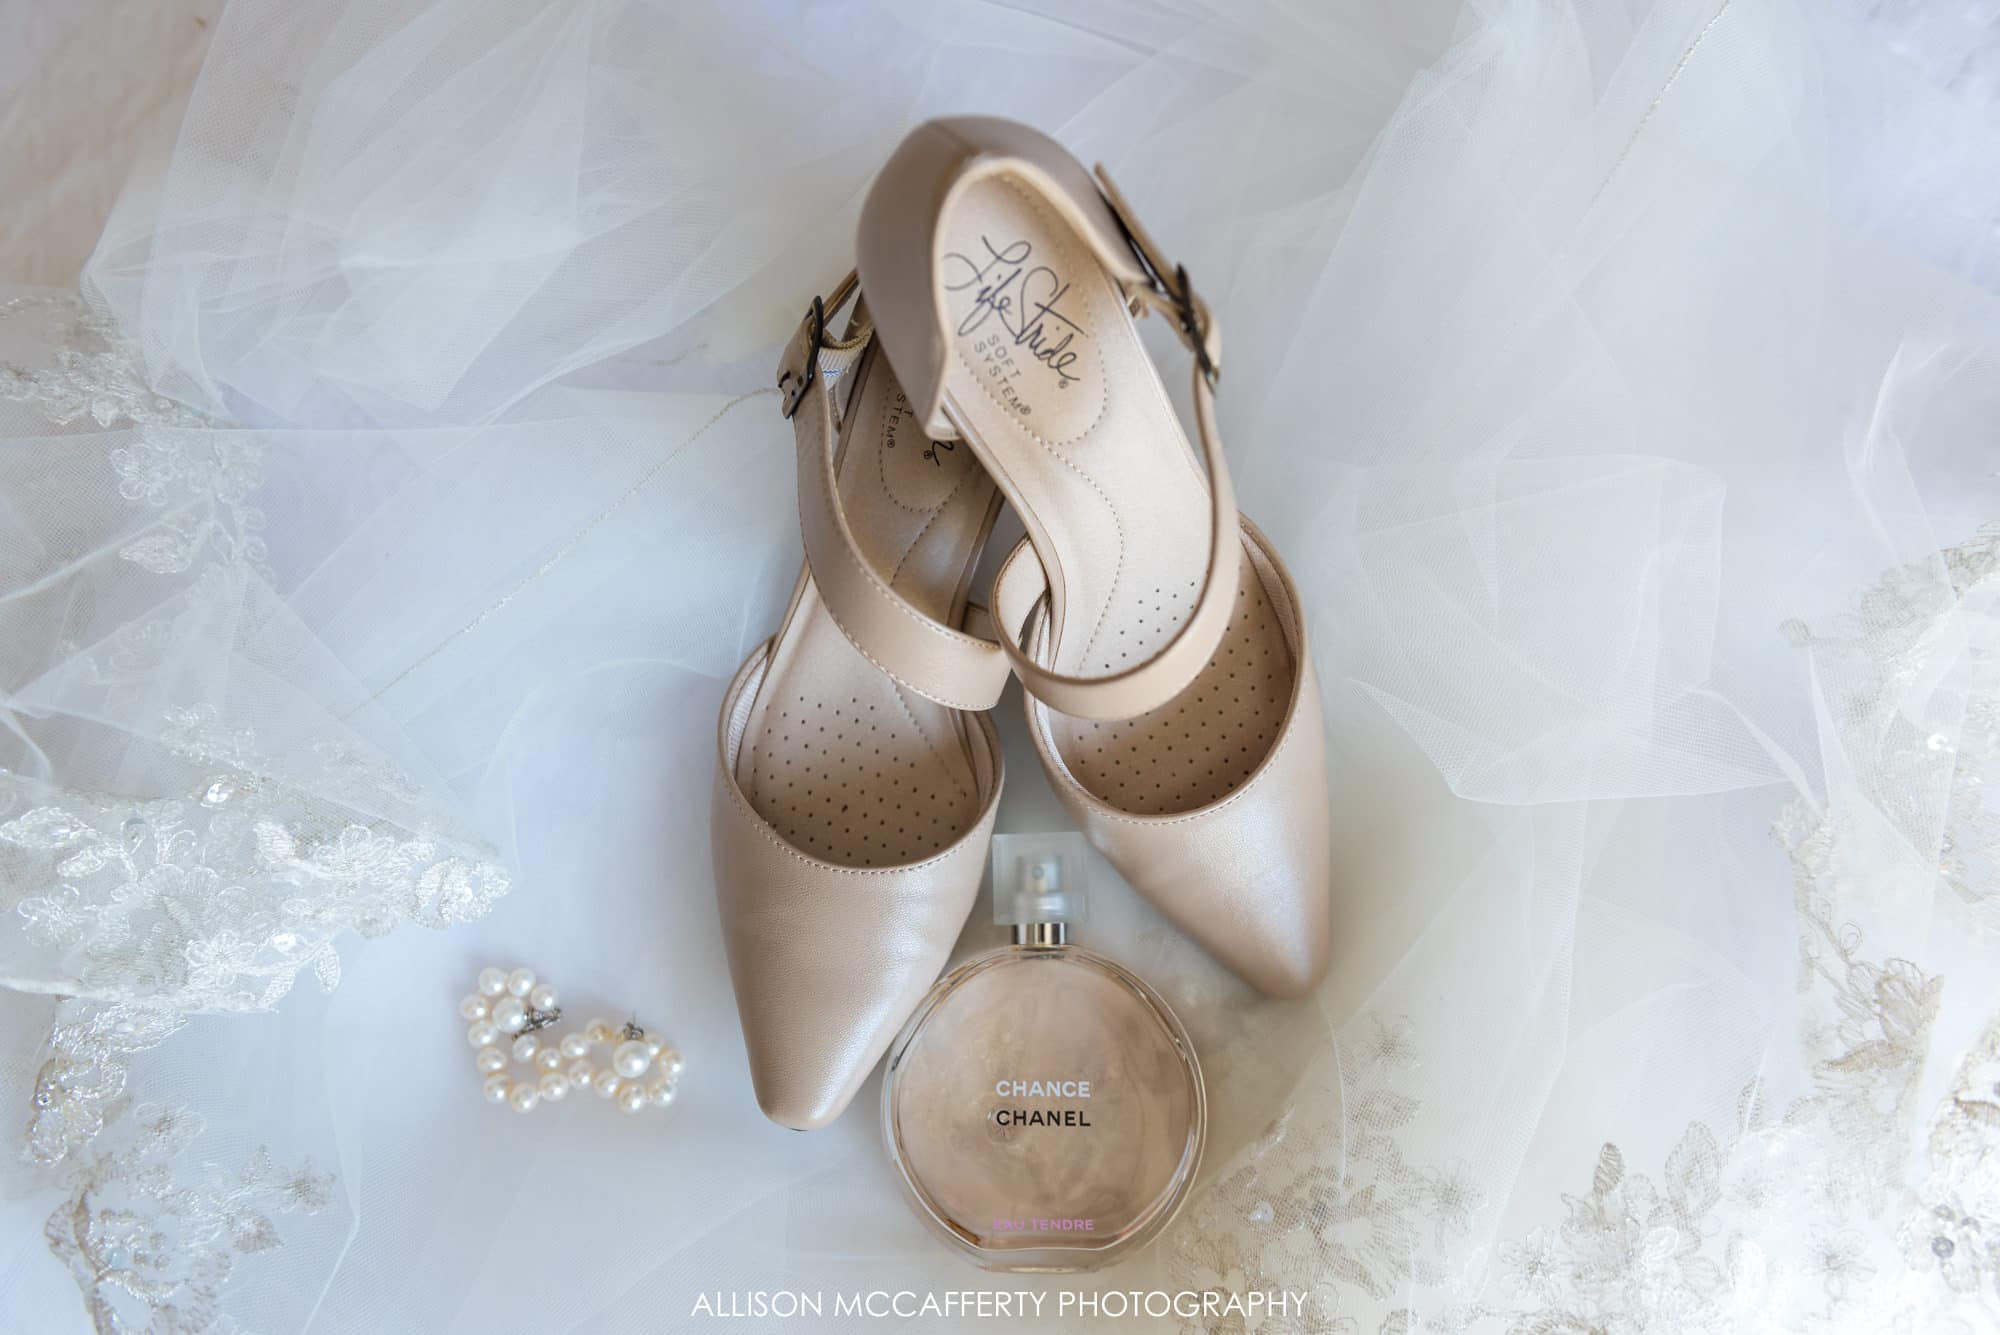 Wedding details, shoes, jewelry and perfume on a lace veil